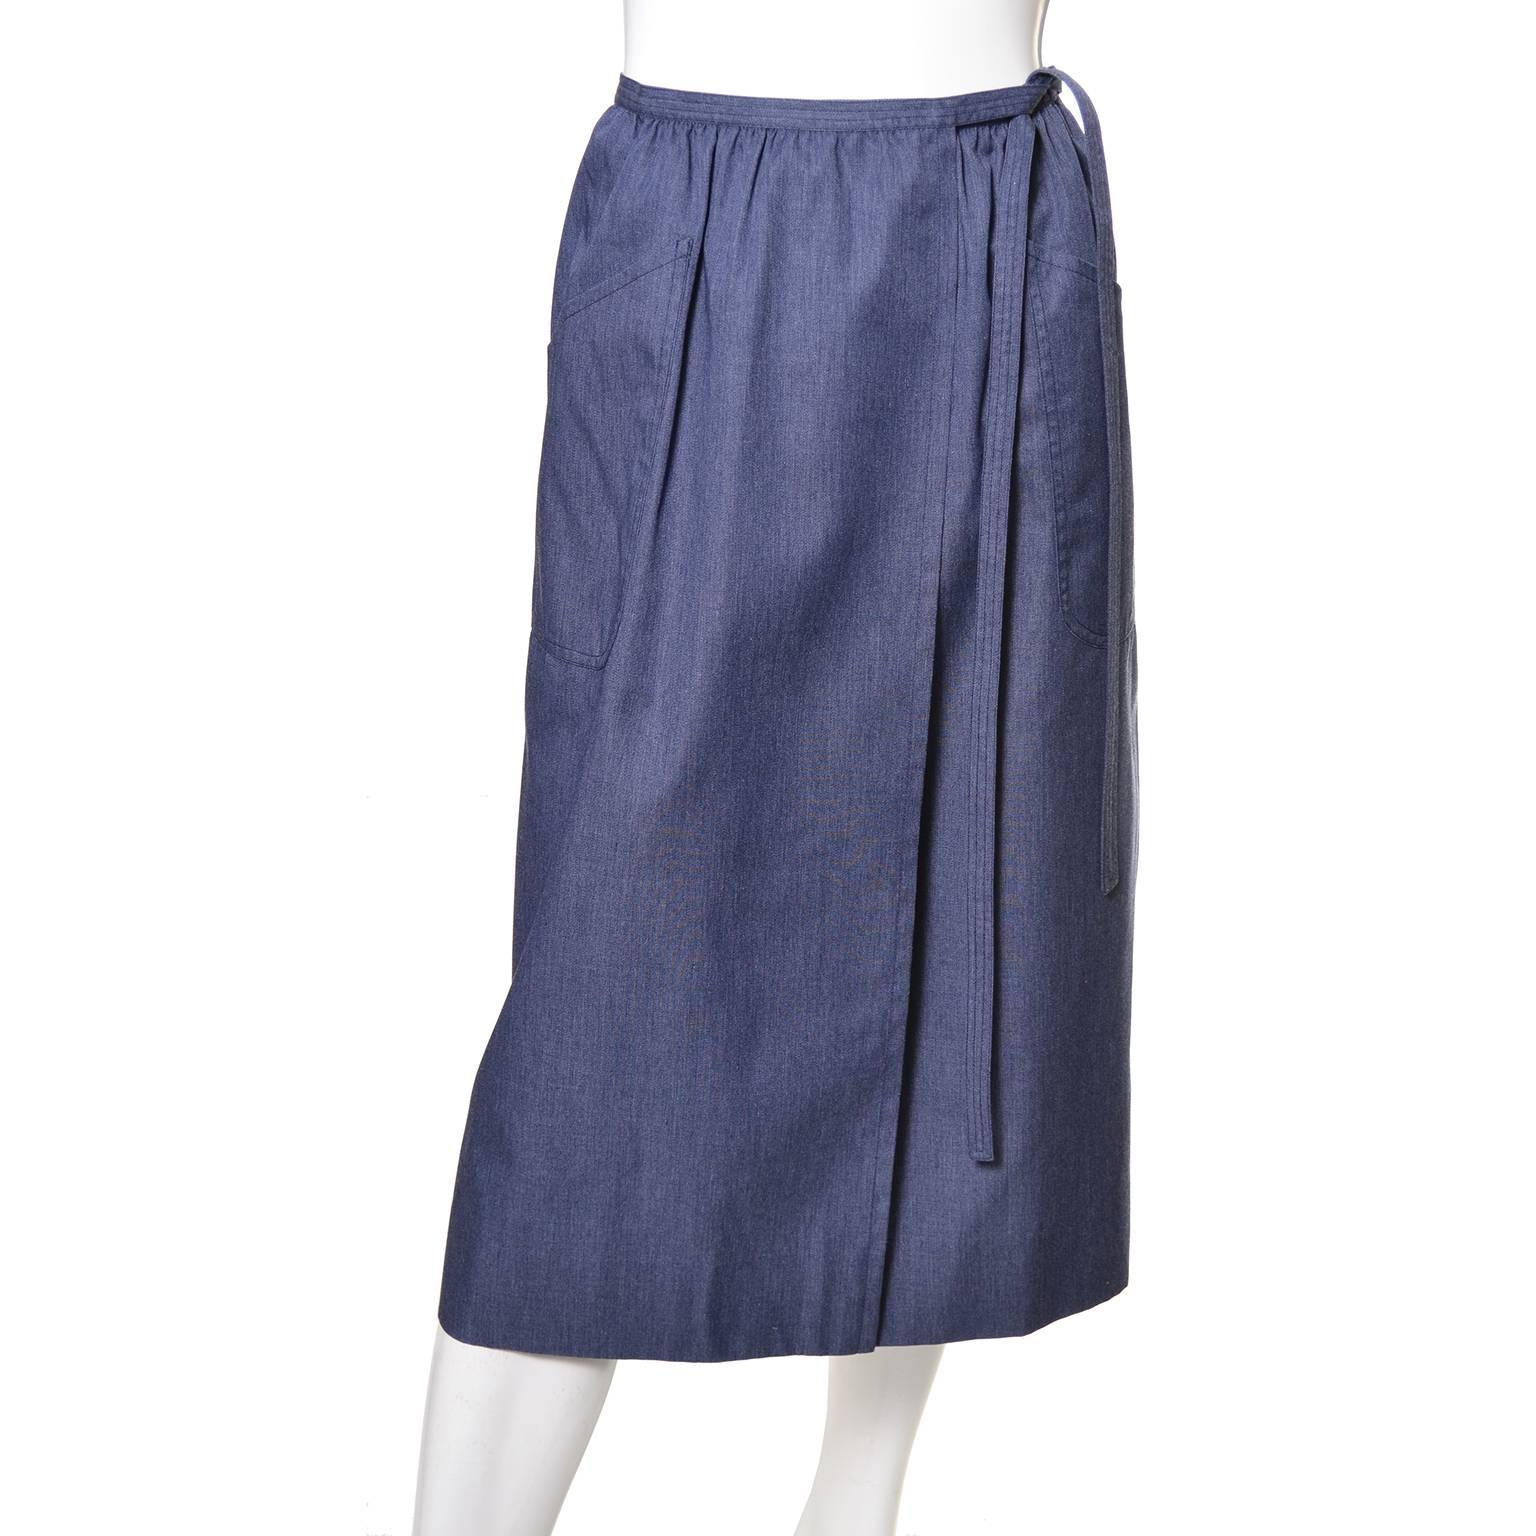 This is another vintage YSL piece from an estate of vintage Yves Saint Laurent clothing from the 1970's and early 1980's.  This pretty chambray skirt has pockets and connects with 2 hooks and eyes, with the appearance of a wrap skirt.  This skirt,